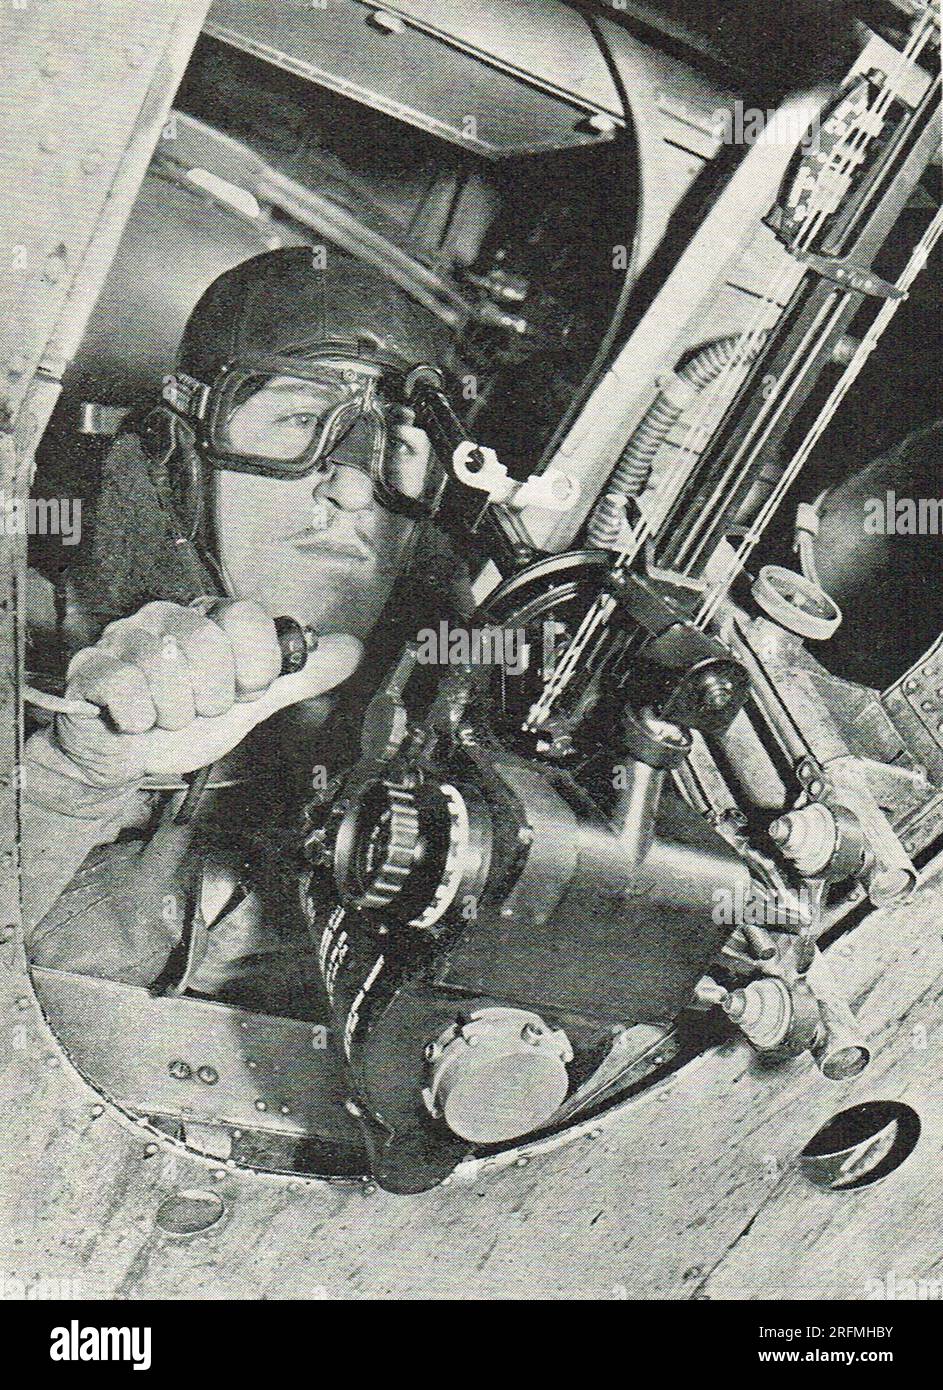 Bomb aimer taking aim during world war 2. The navigator is holding  the bomb release switch in his right hand. Stock Photo